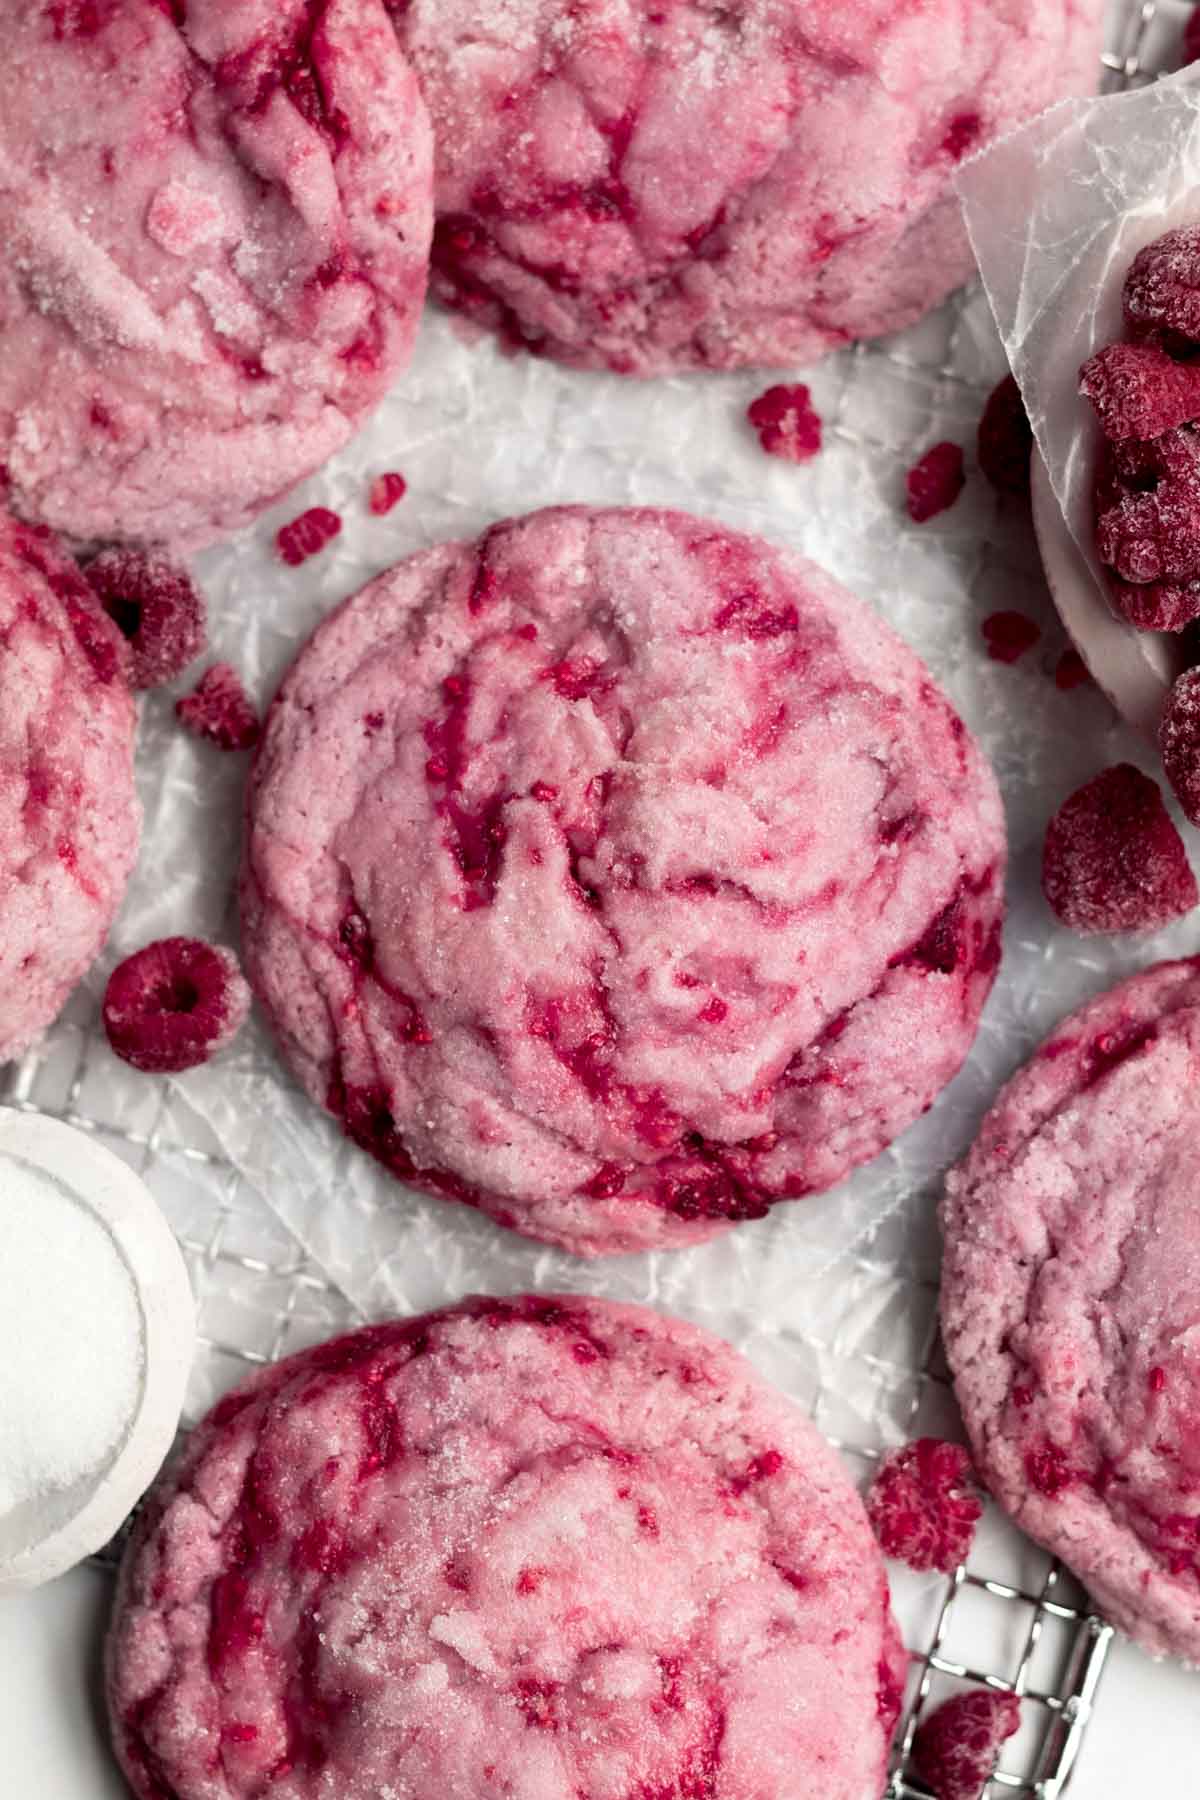 Irresistible Raspberry Cookies infused with luscious raspberries and coated perfectly in sugar.